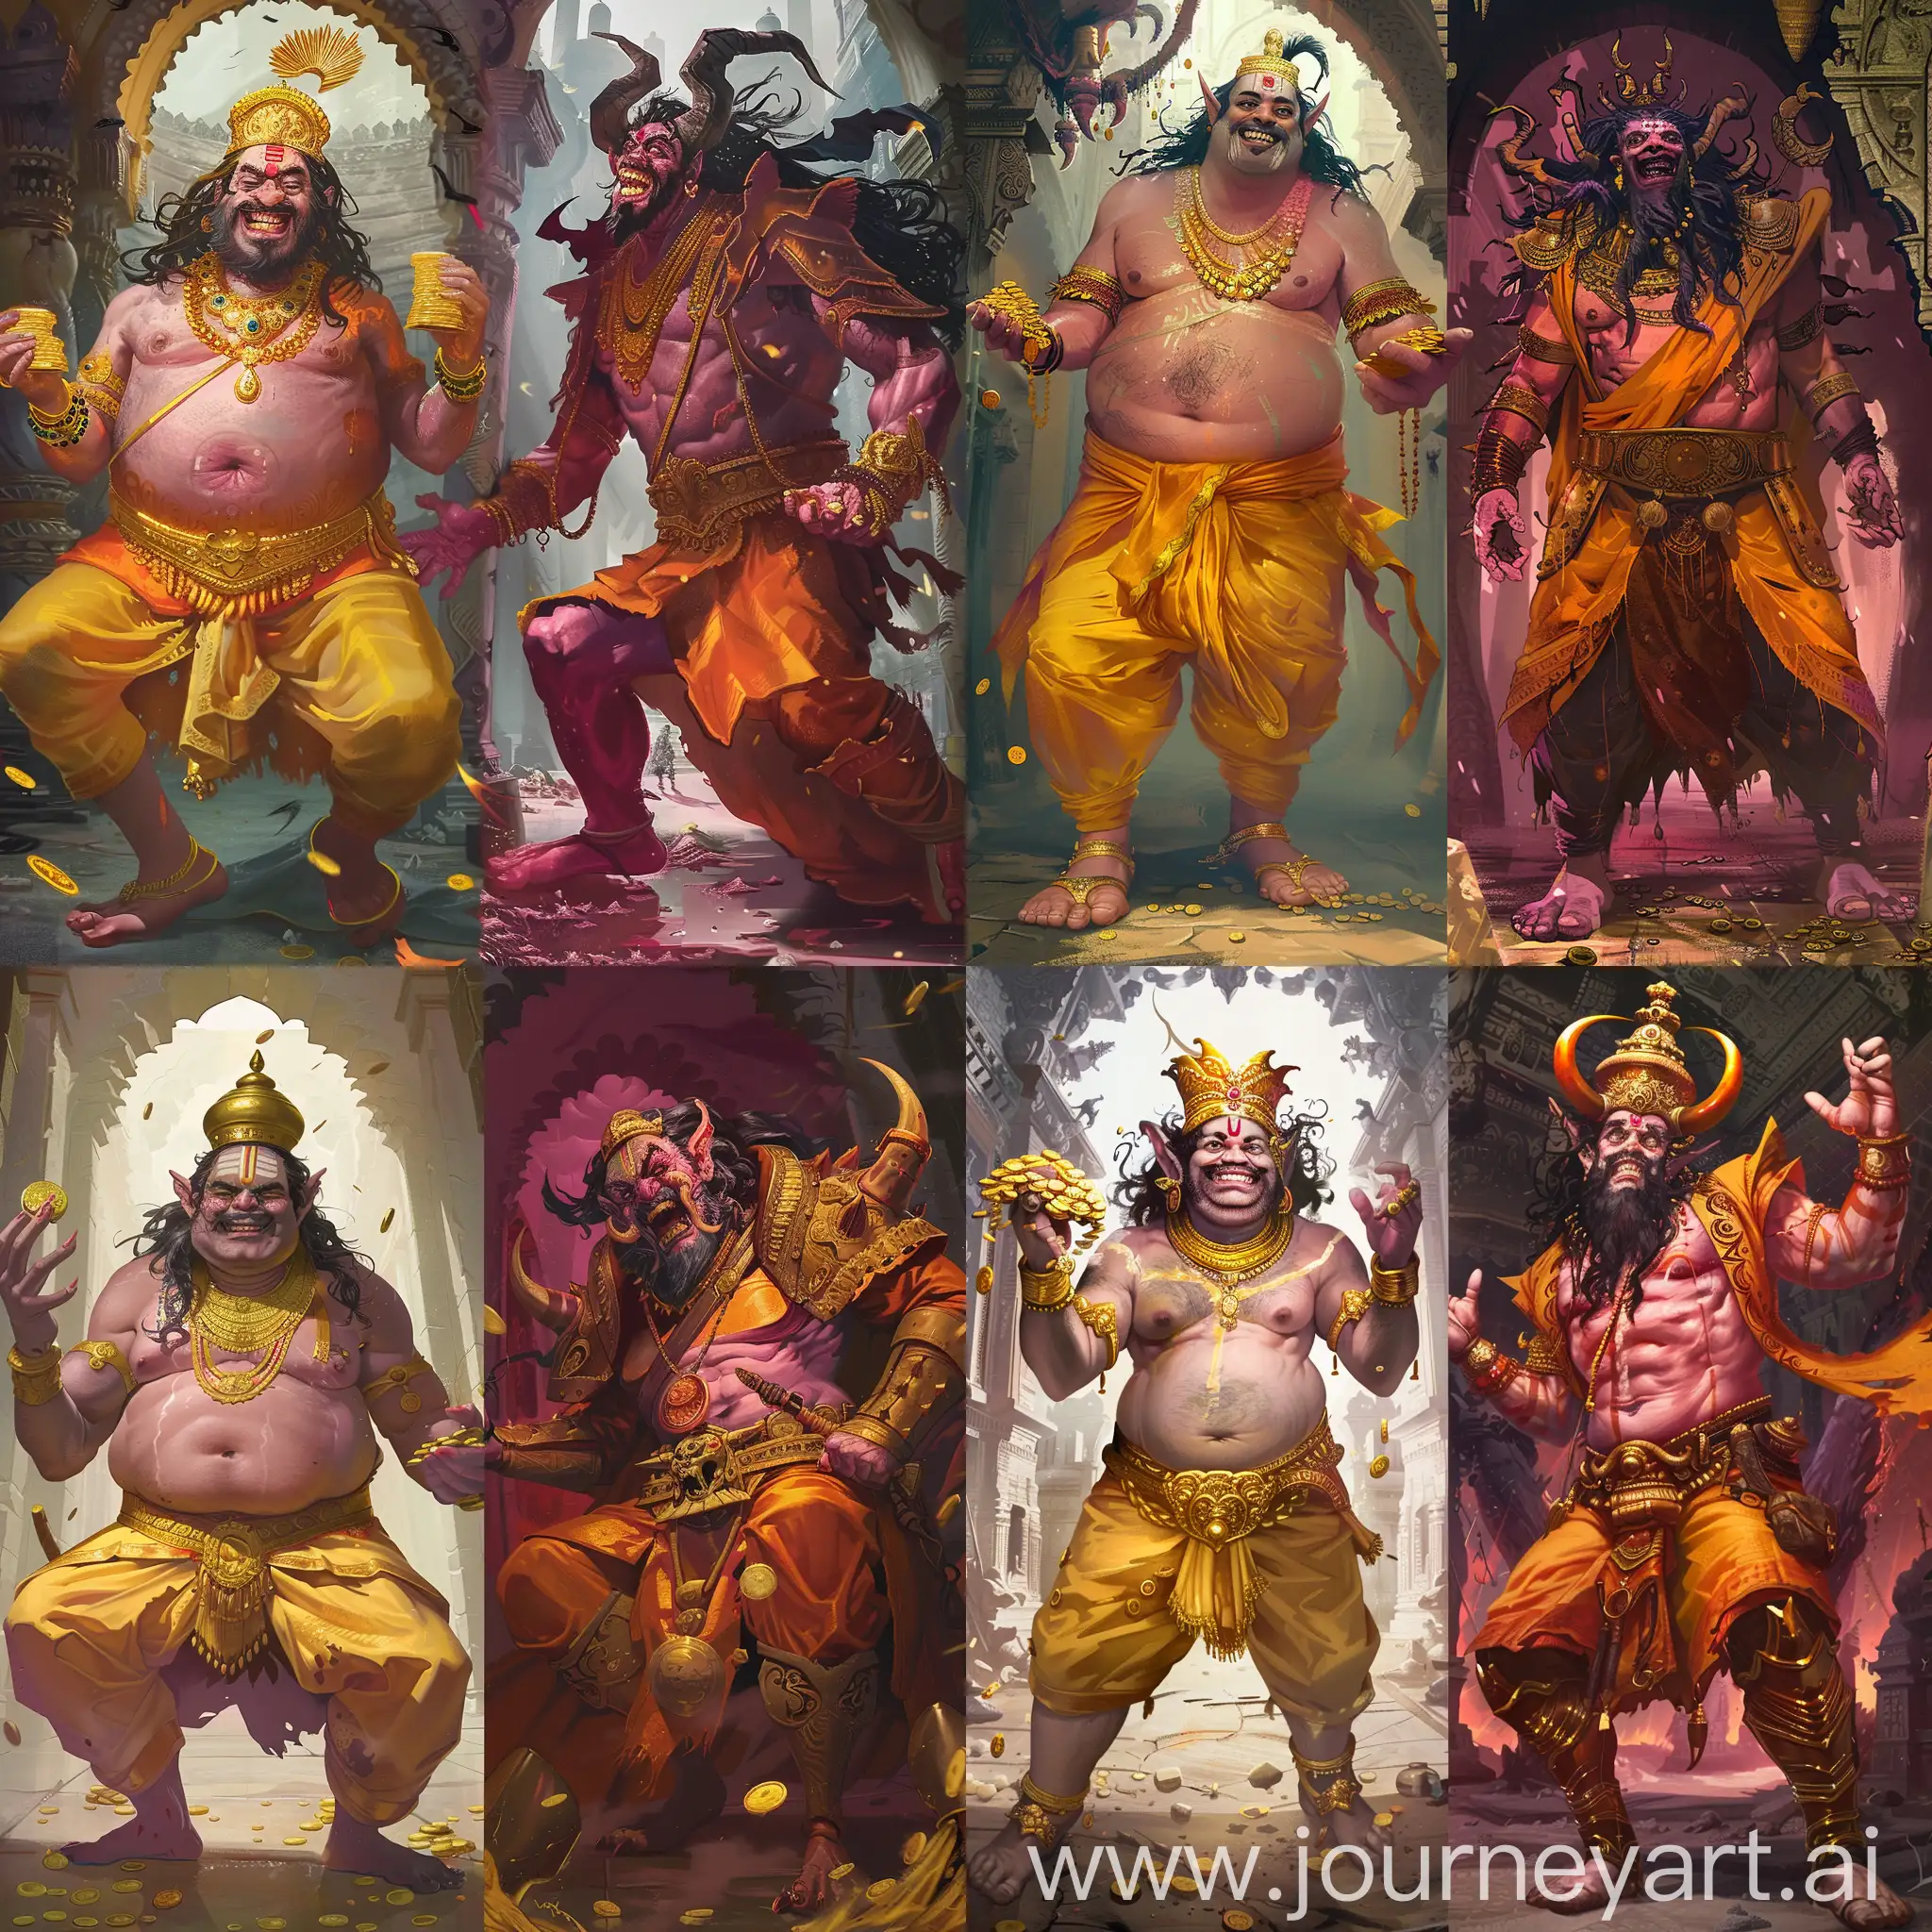 Ancient-Indian-Lord-Kubera-and-Demon-King-Ravana-in-a-Mysterious-Hindu-Temple